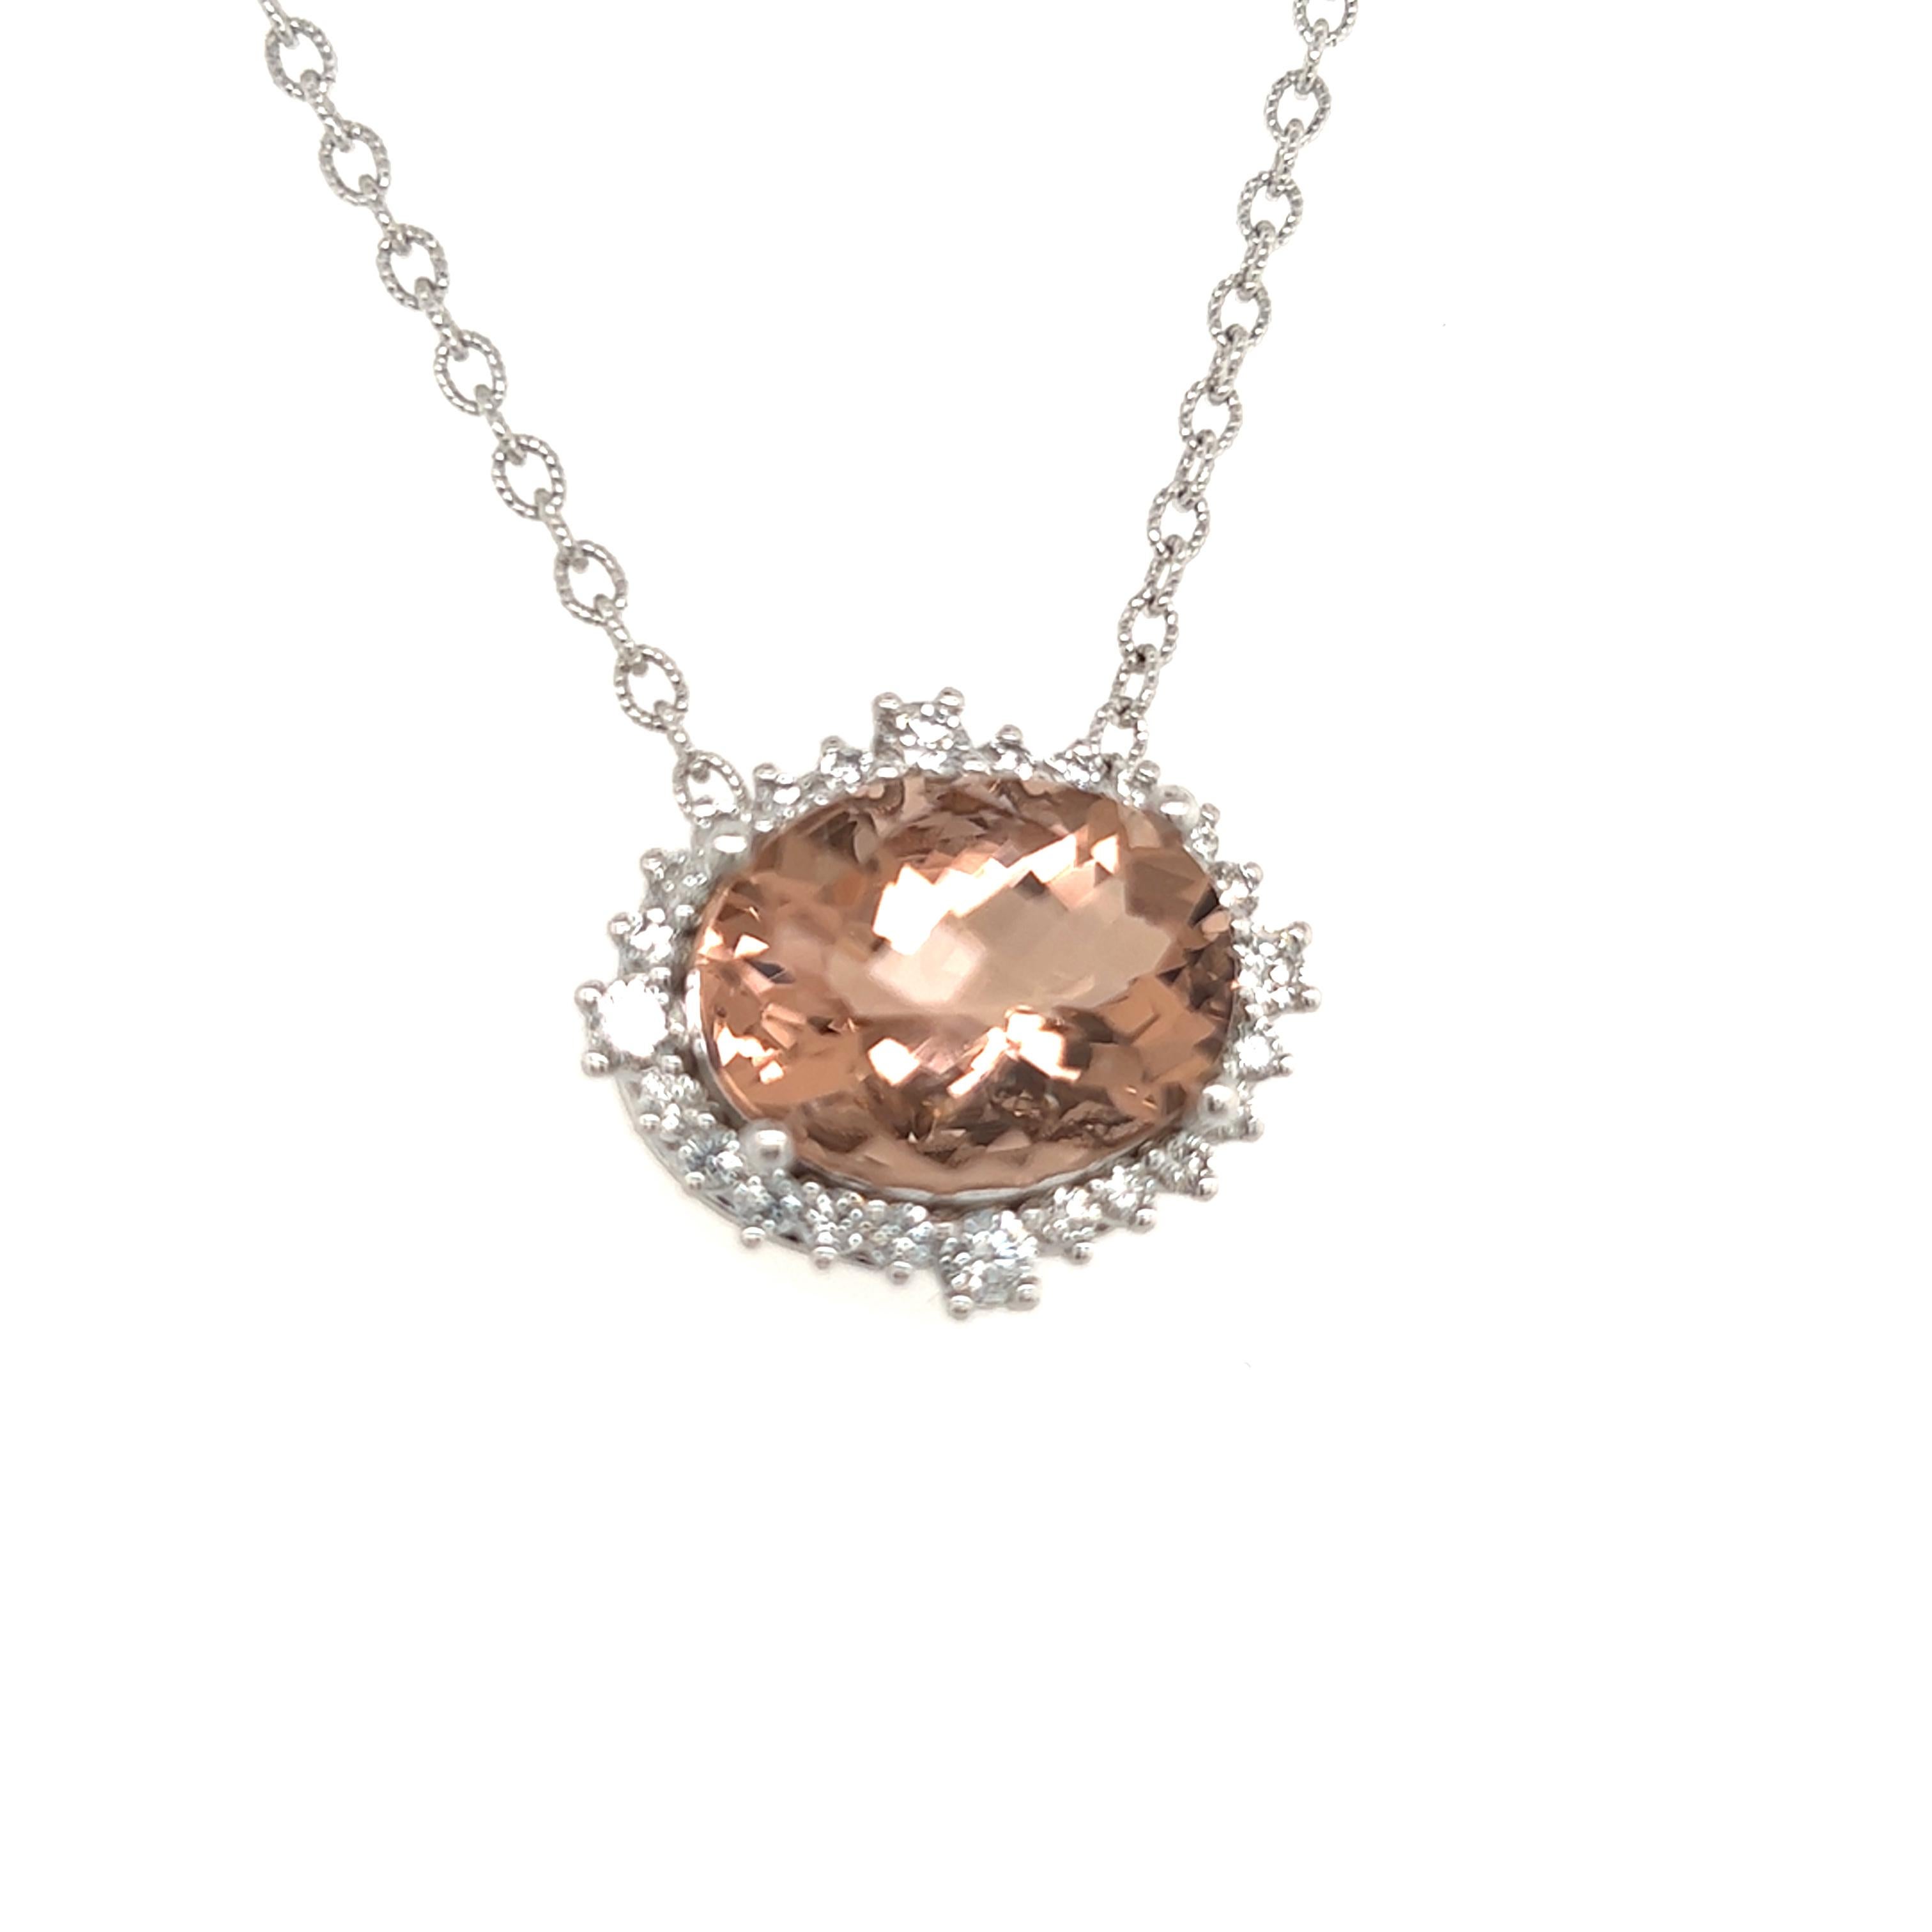 Natural Morganite Diamond Necklace 14k Gold 10.67 TCW Certified For Sale 1